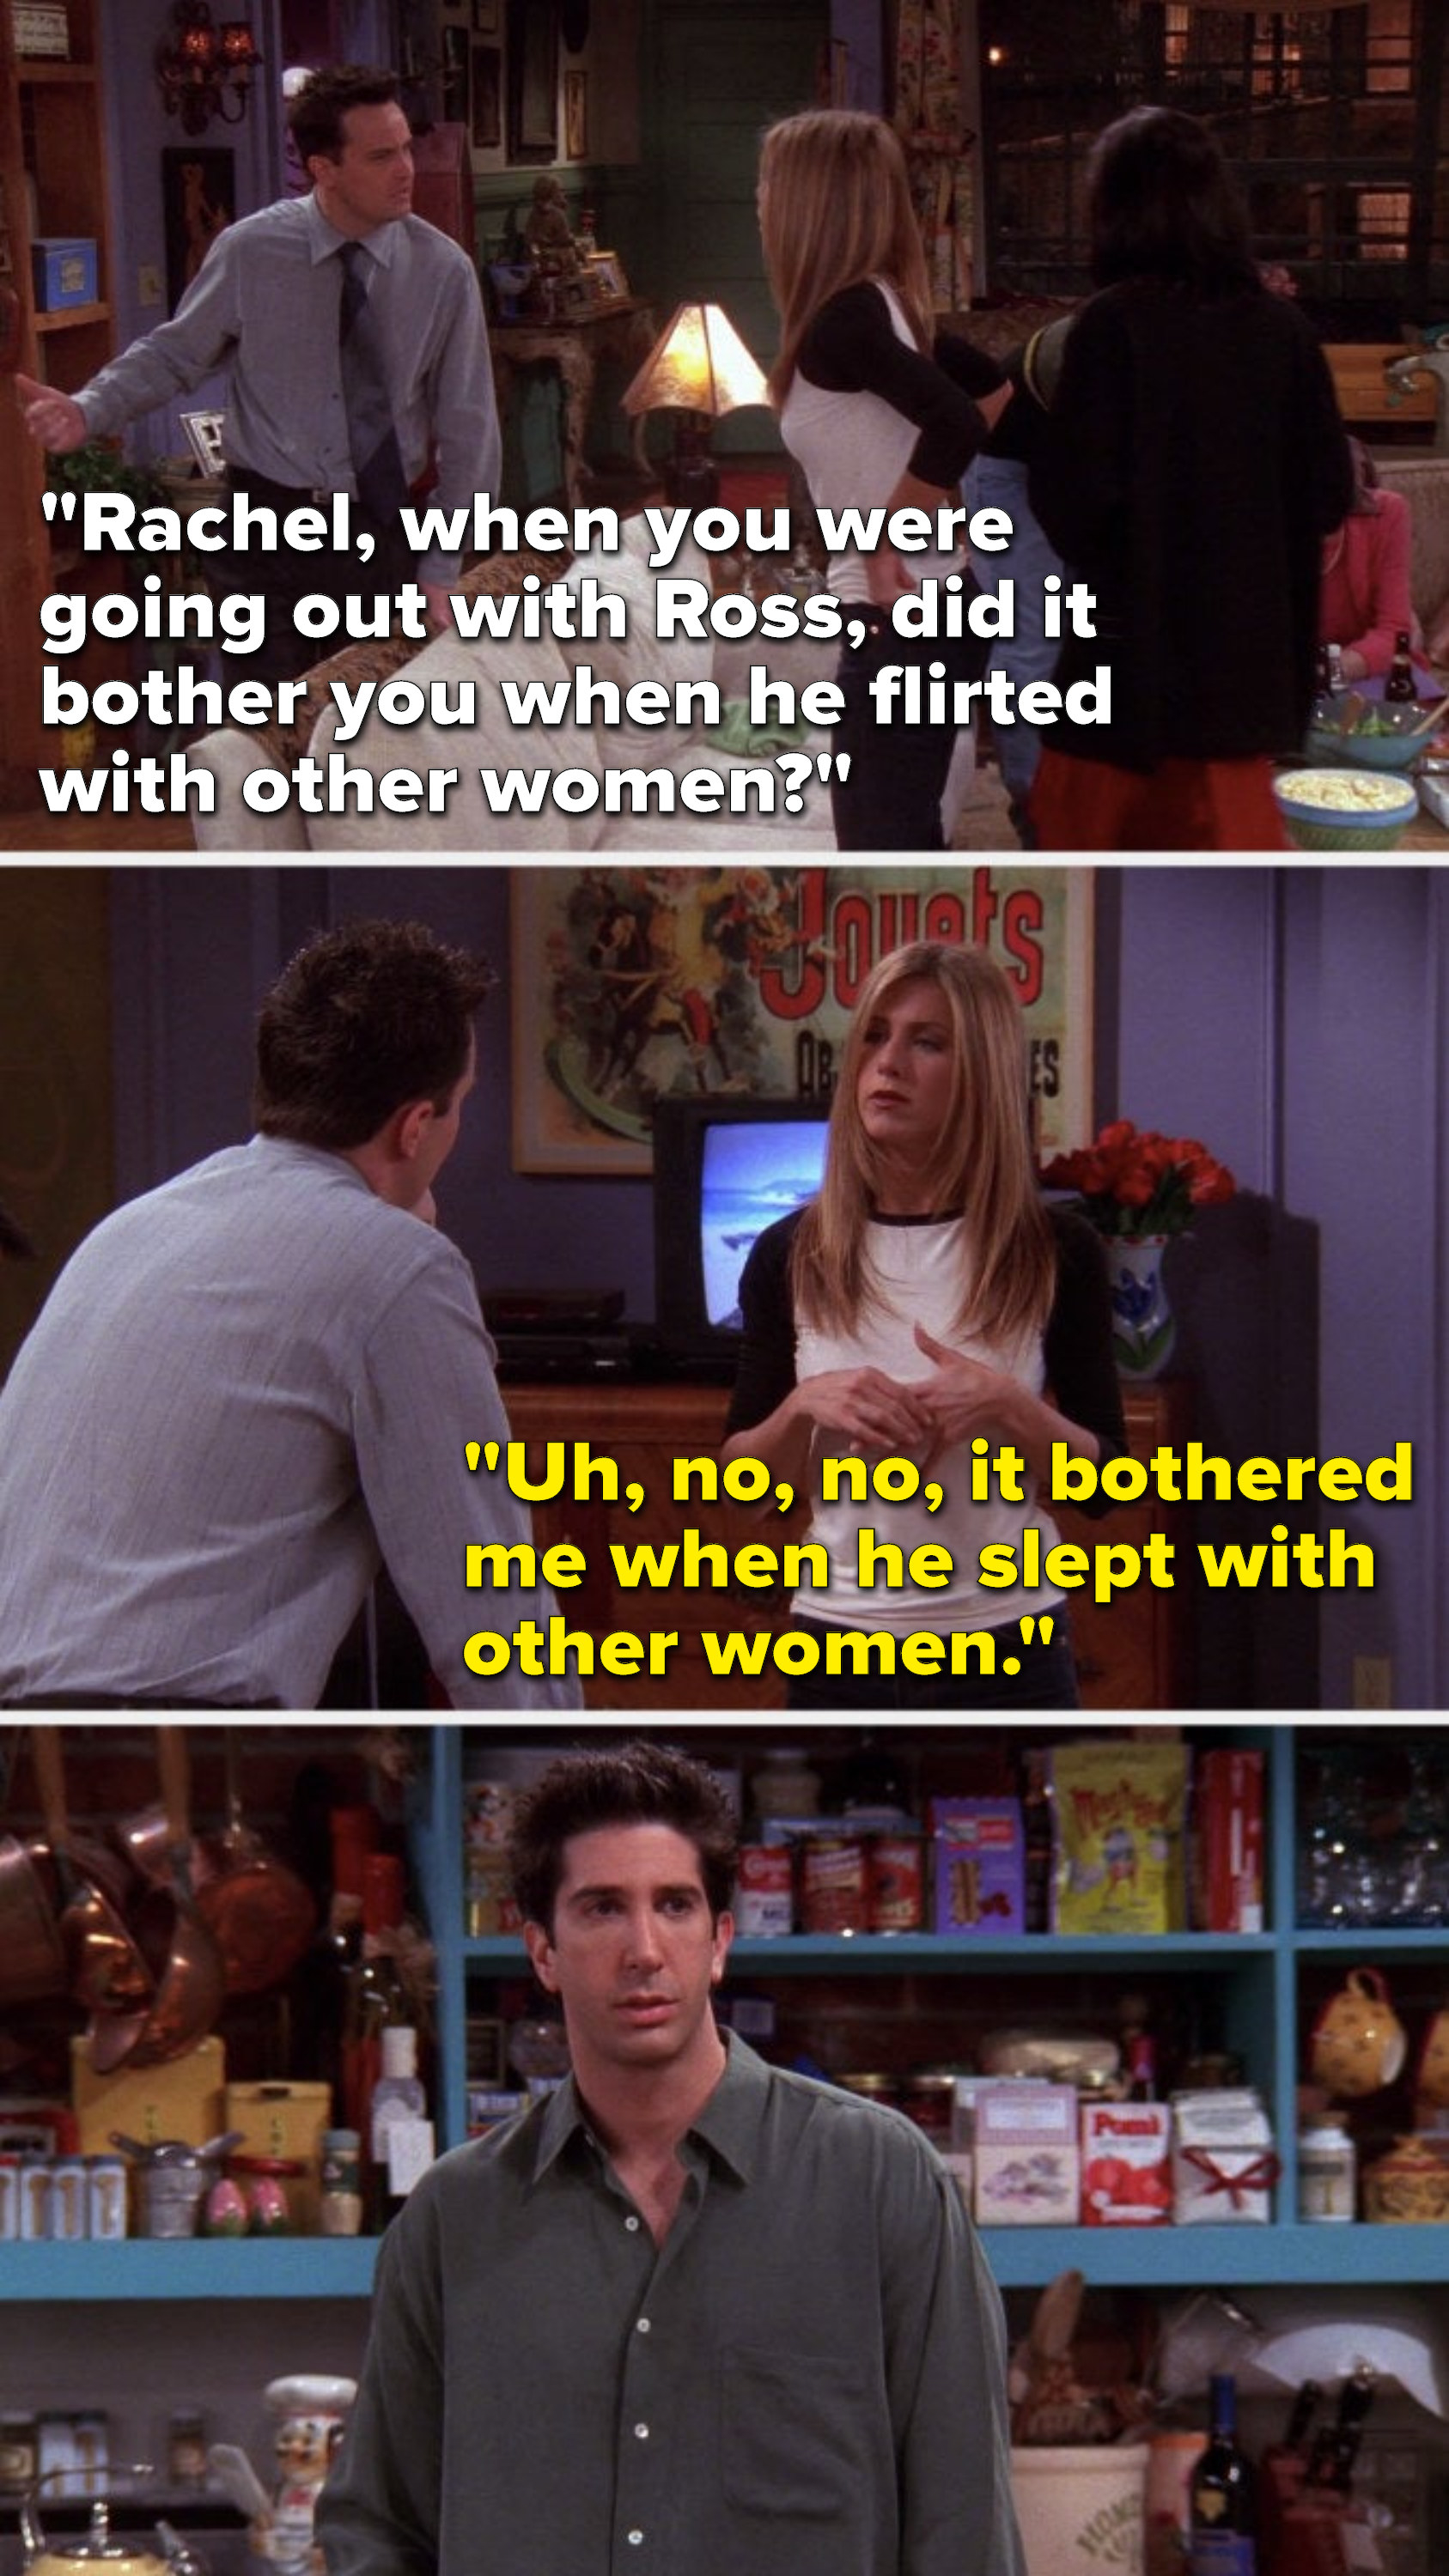 Chandler says, &quot;Rachel, when you were going out with Ross, did it bother you when he flirted with other women,&quot; and Rachel says, &quot;Uh, no, no, it bothered me when he slept with other women&quot;